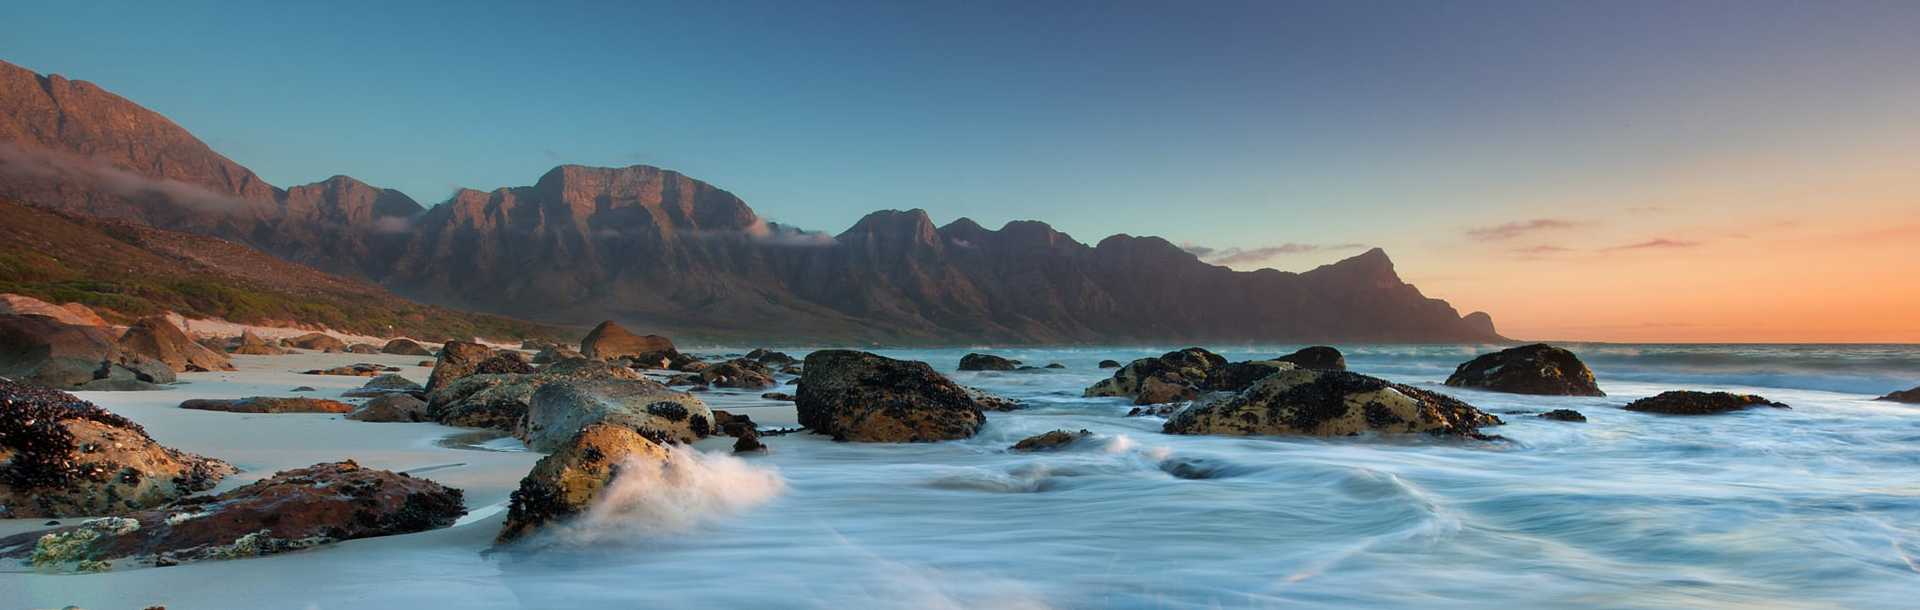 Kogel Bay in Cape Province, South Africa.